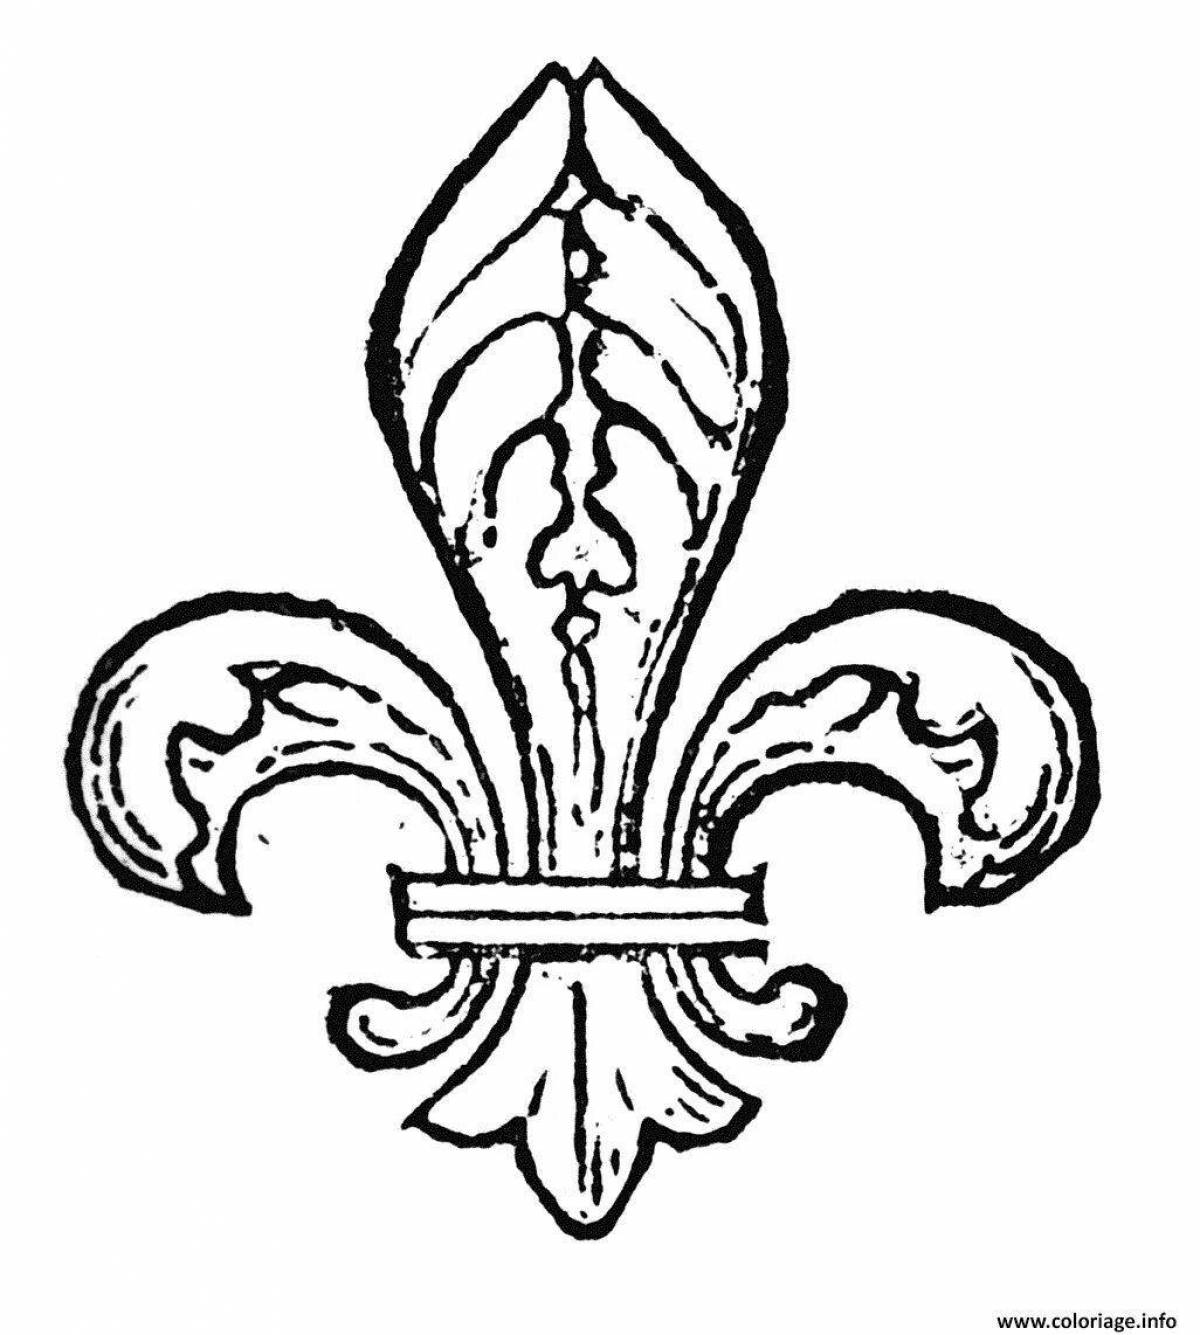 Coloring page sublime coat of arms of france